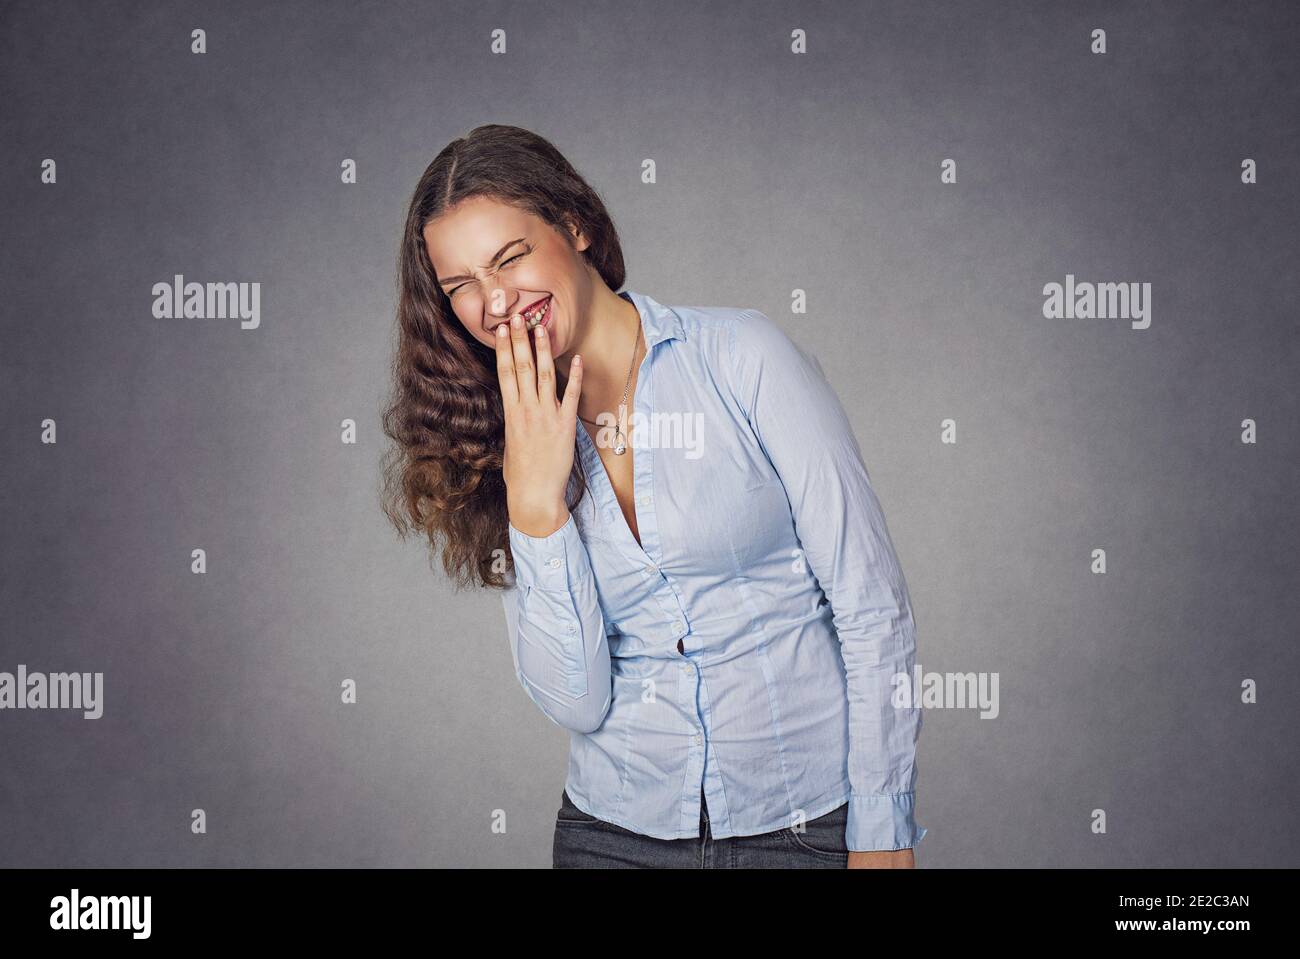 Beautiful smiling shy woman covering teeth with hand, girl with clean skin, natural make-up laughing happy isolated on studio gray background. Model g Stock Photo